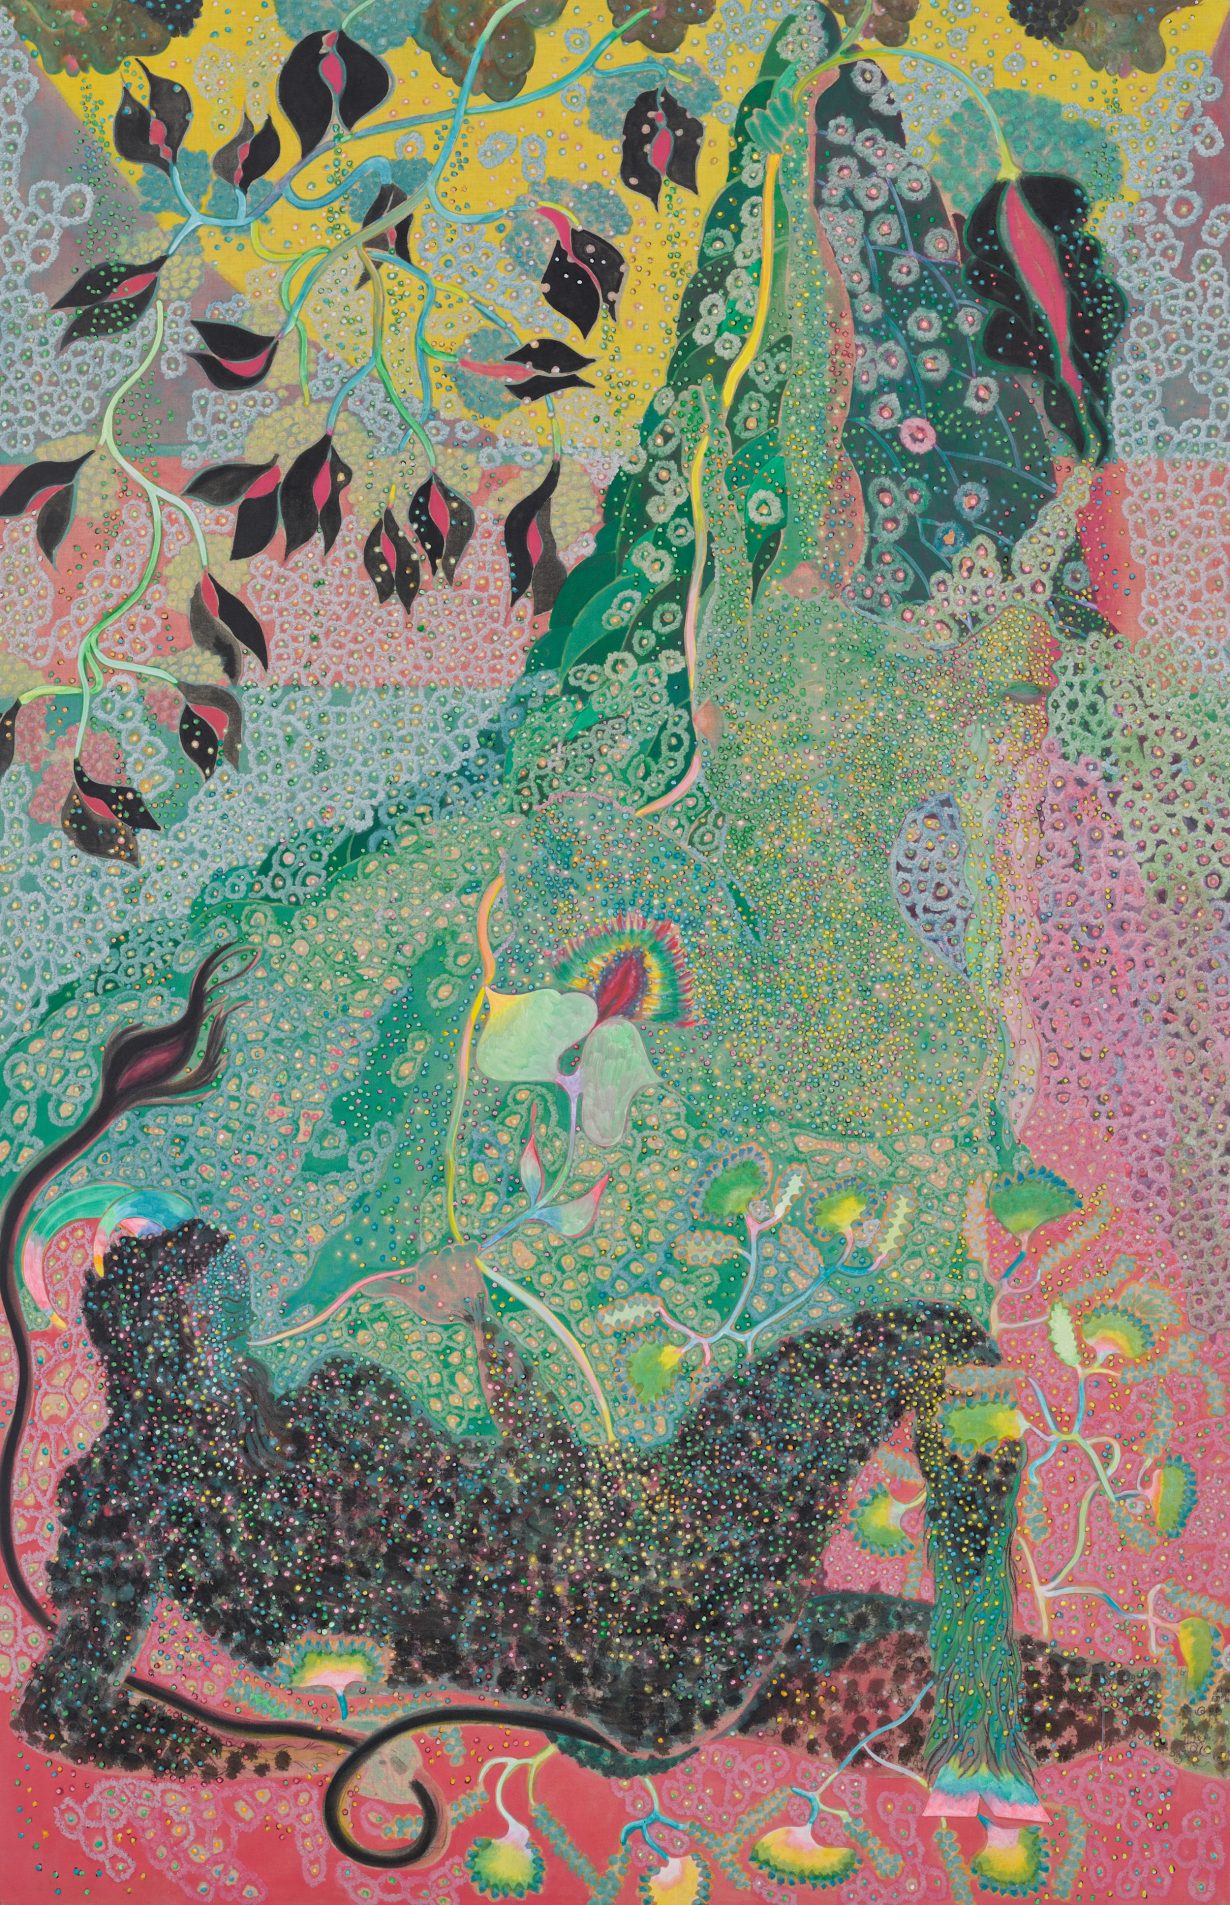 Chris Ofili, The Swing, 2020-2023, oil and charcoal on linen, 310 x 200 cm, 122 x 78 3:4 in © Chris Ofili. Courtesy the artist and Victoria Miro